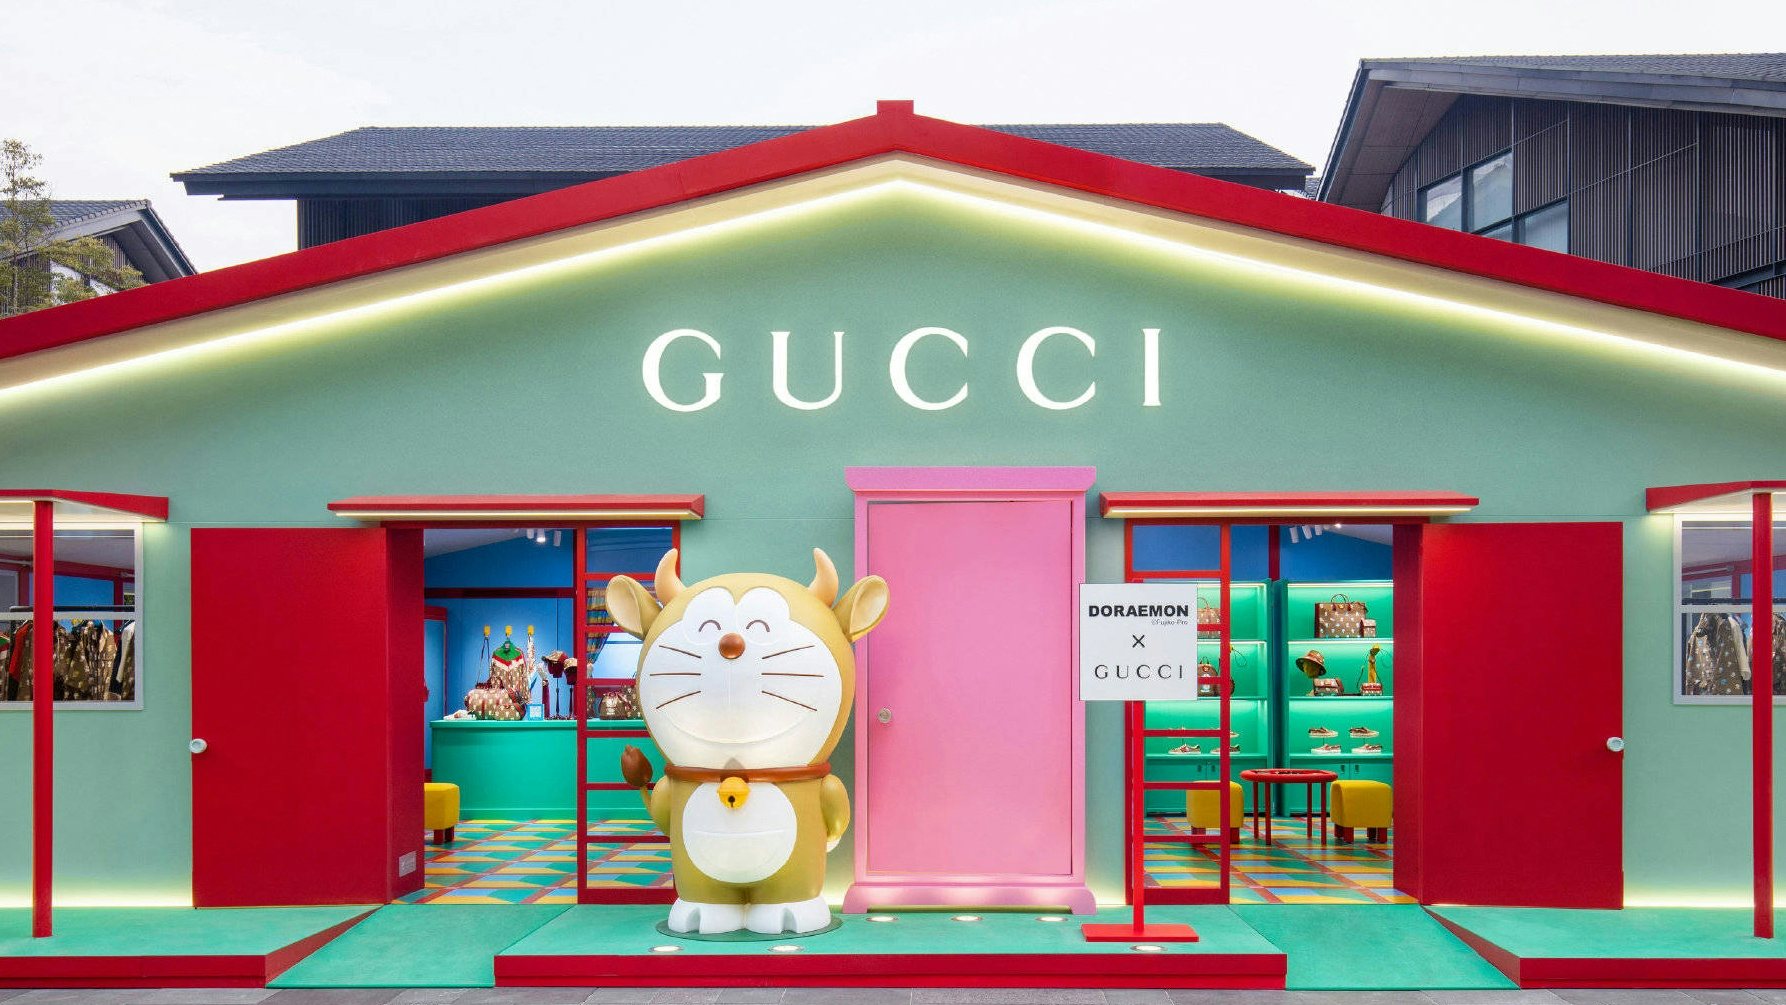 Much has been made of the post-pandemic shift to e-commerce. But some retail executives believe offline sales will slowly start to surge again. Photo: Courtesy of Gucci